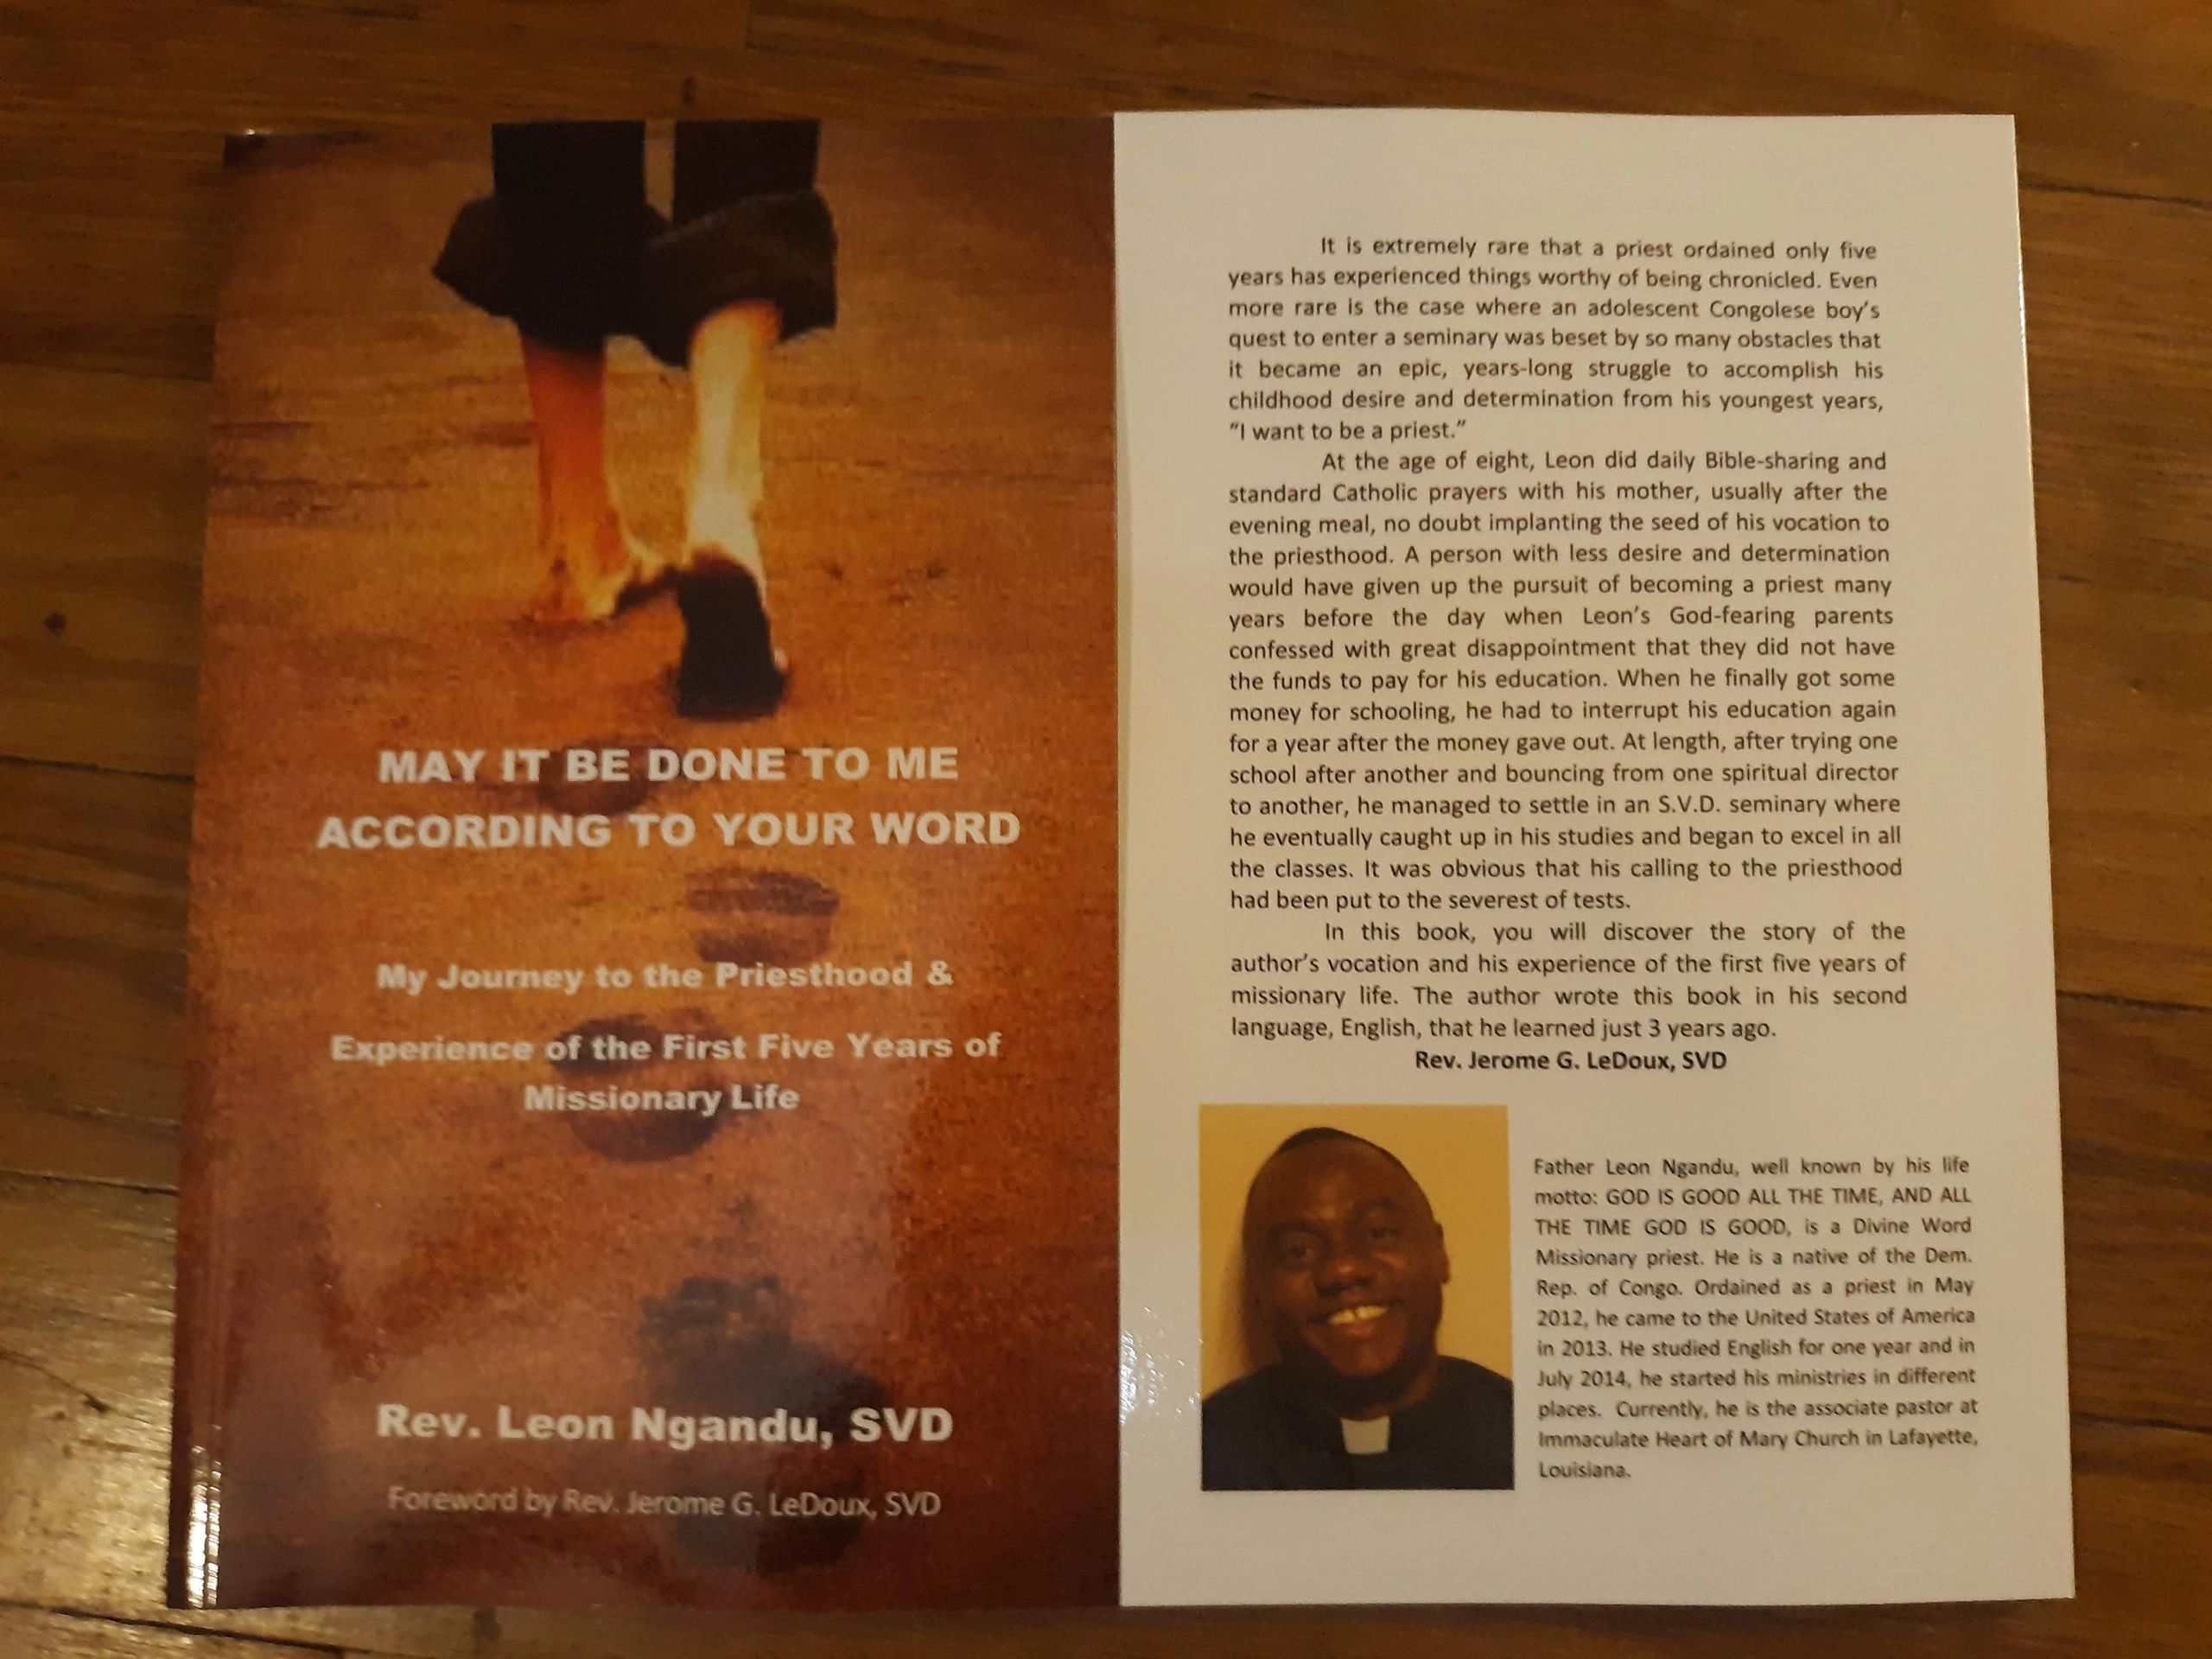 Fr. Leon's book about his journey to the priesthood and his experience as a priest.